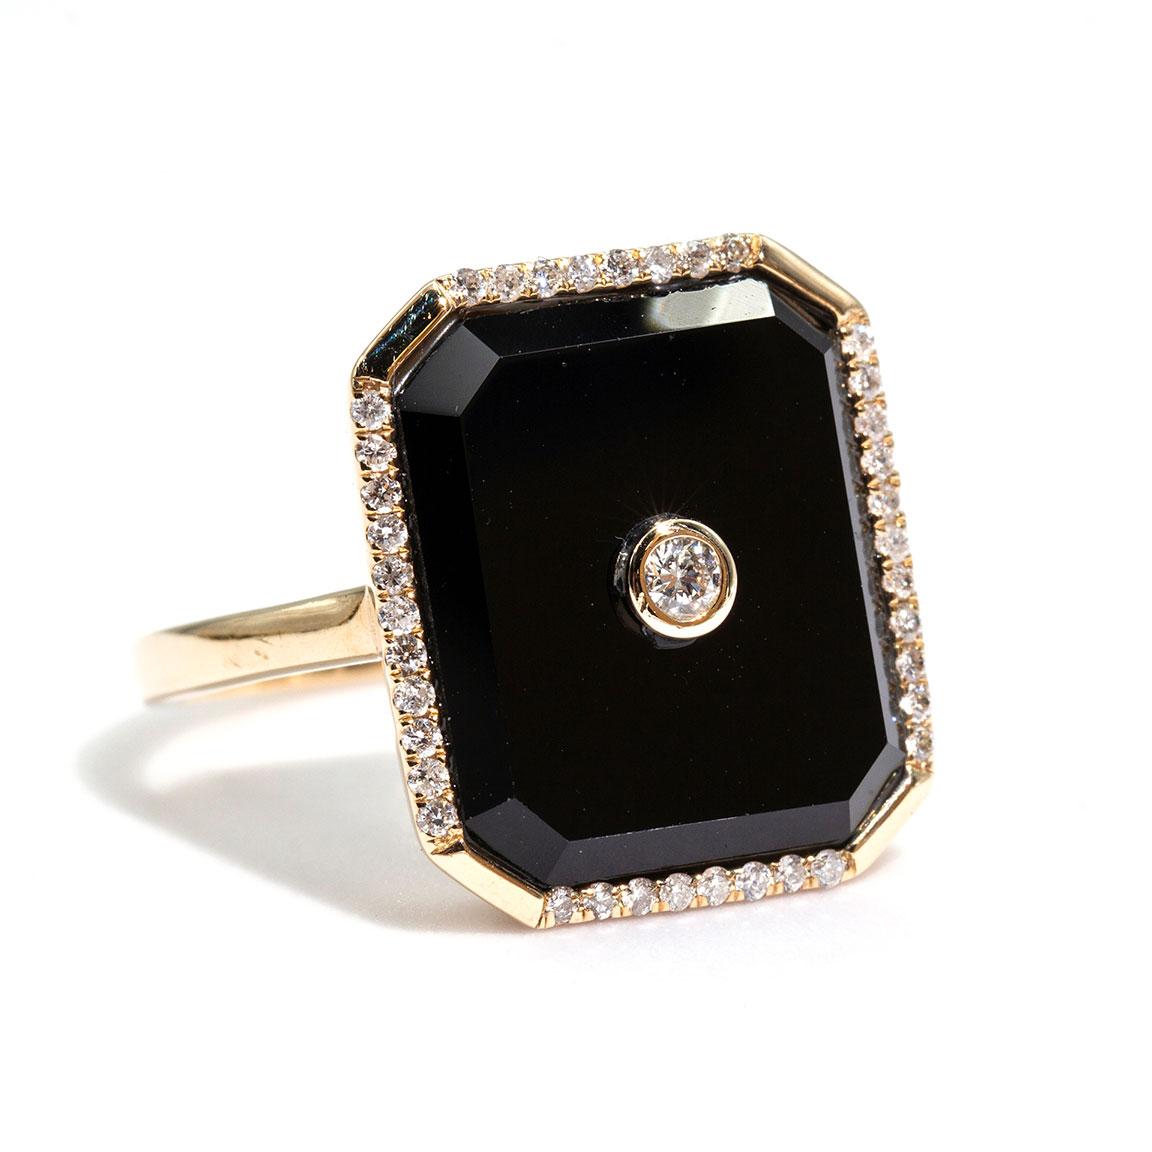 Carefully crafted in 9 carat yellow gold is this gorgeous Art Deco inspired Onyx and Diamond ring. The spectacular contrast between the polish of the Onyx and the sparkle of the diamonds is pure opulence.  We have named this unforgettable piece The